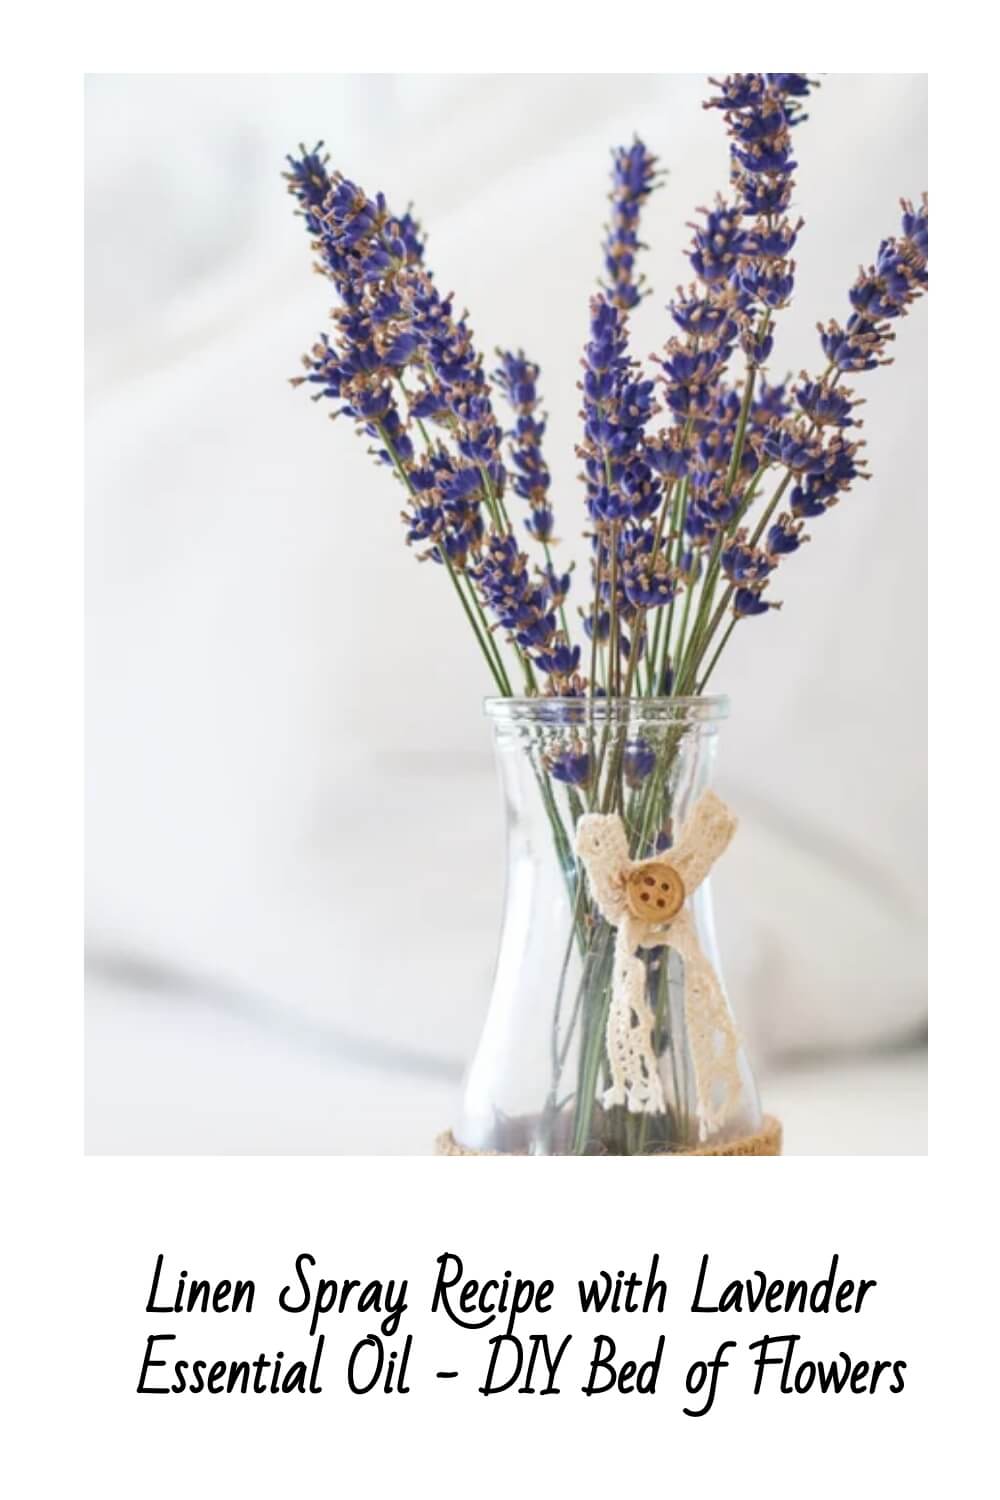 Linen Spray Recipe with Lavender Essential Oil by Loving Essential Oils and Jennifer Lane, Certified Aromatherapist